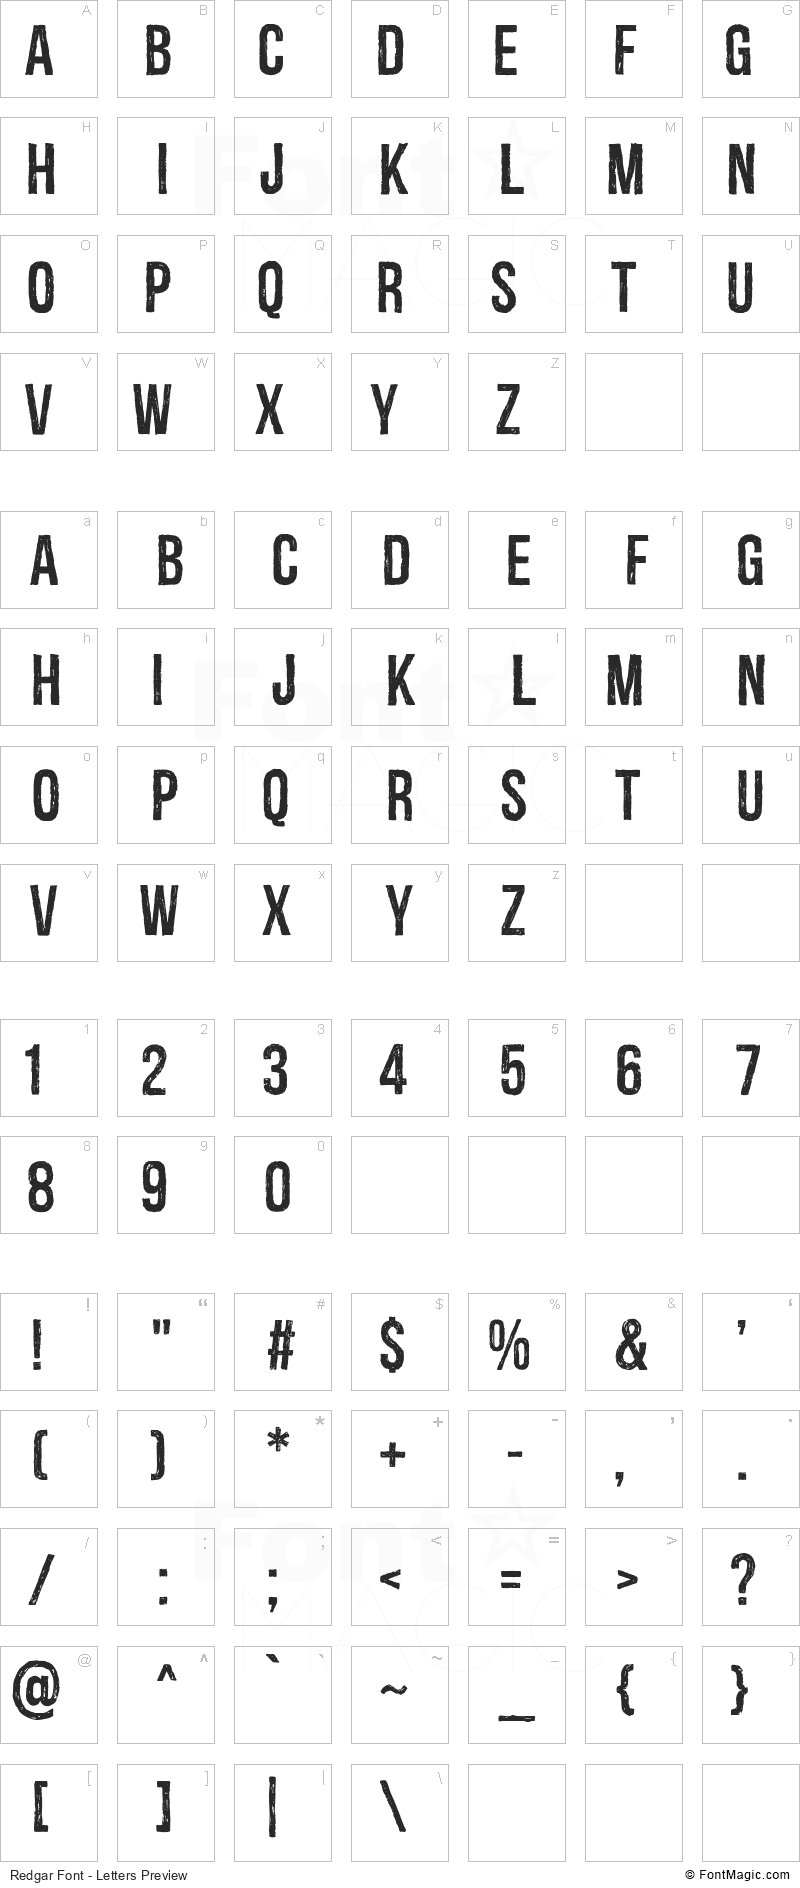 Redgar Font - All Latters Preview Chart